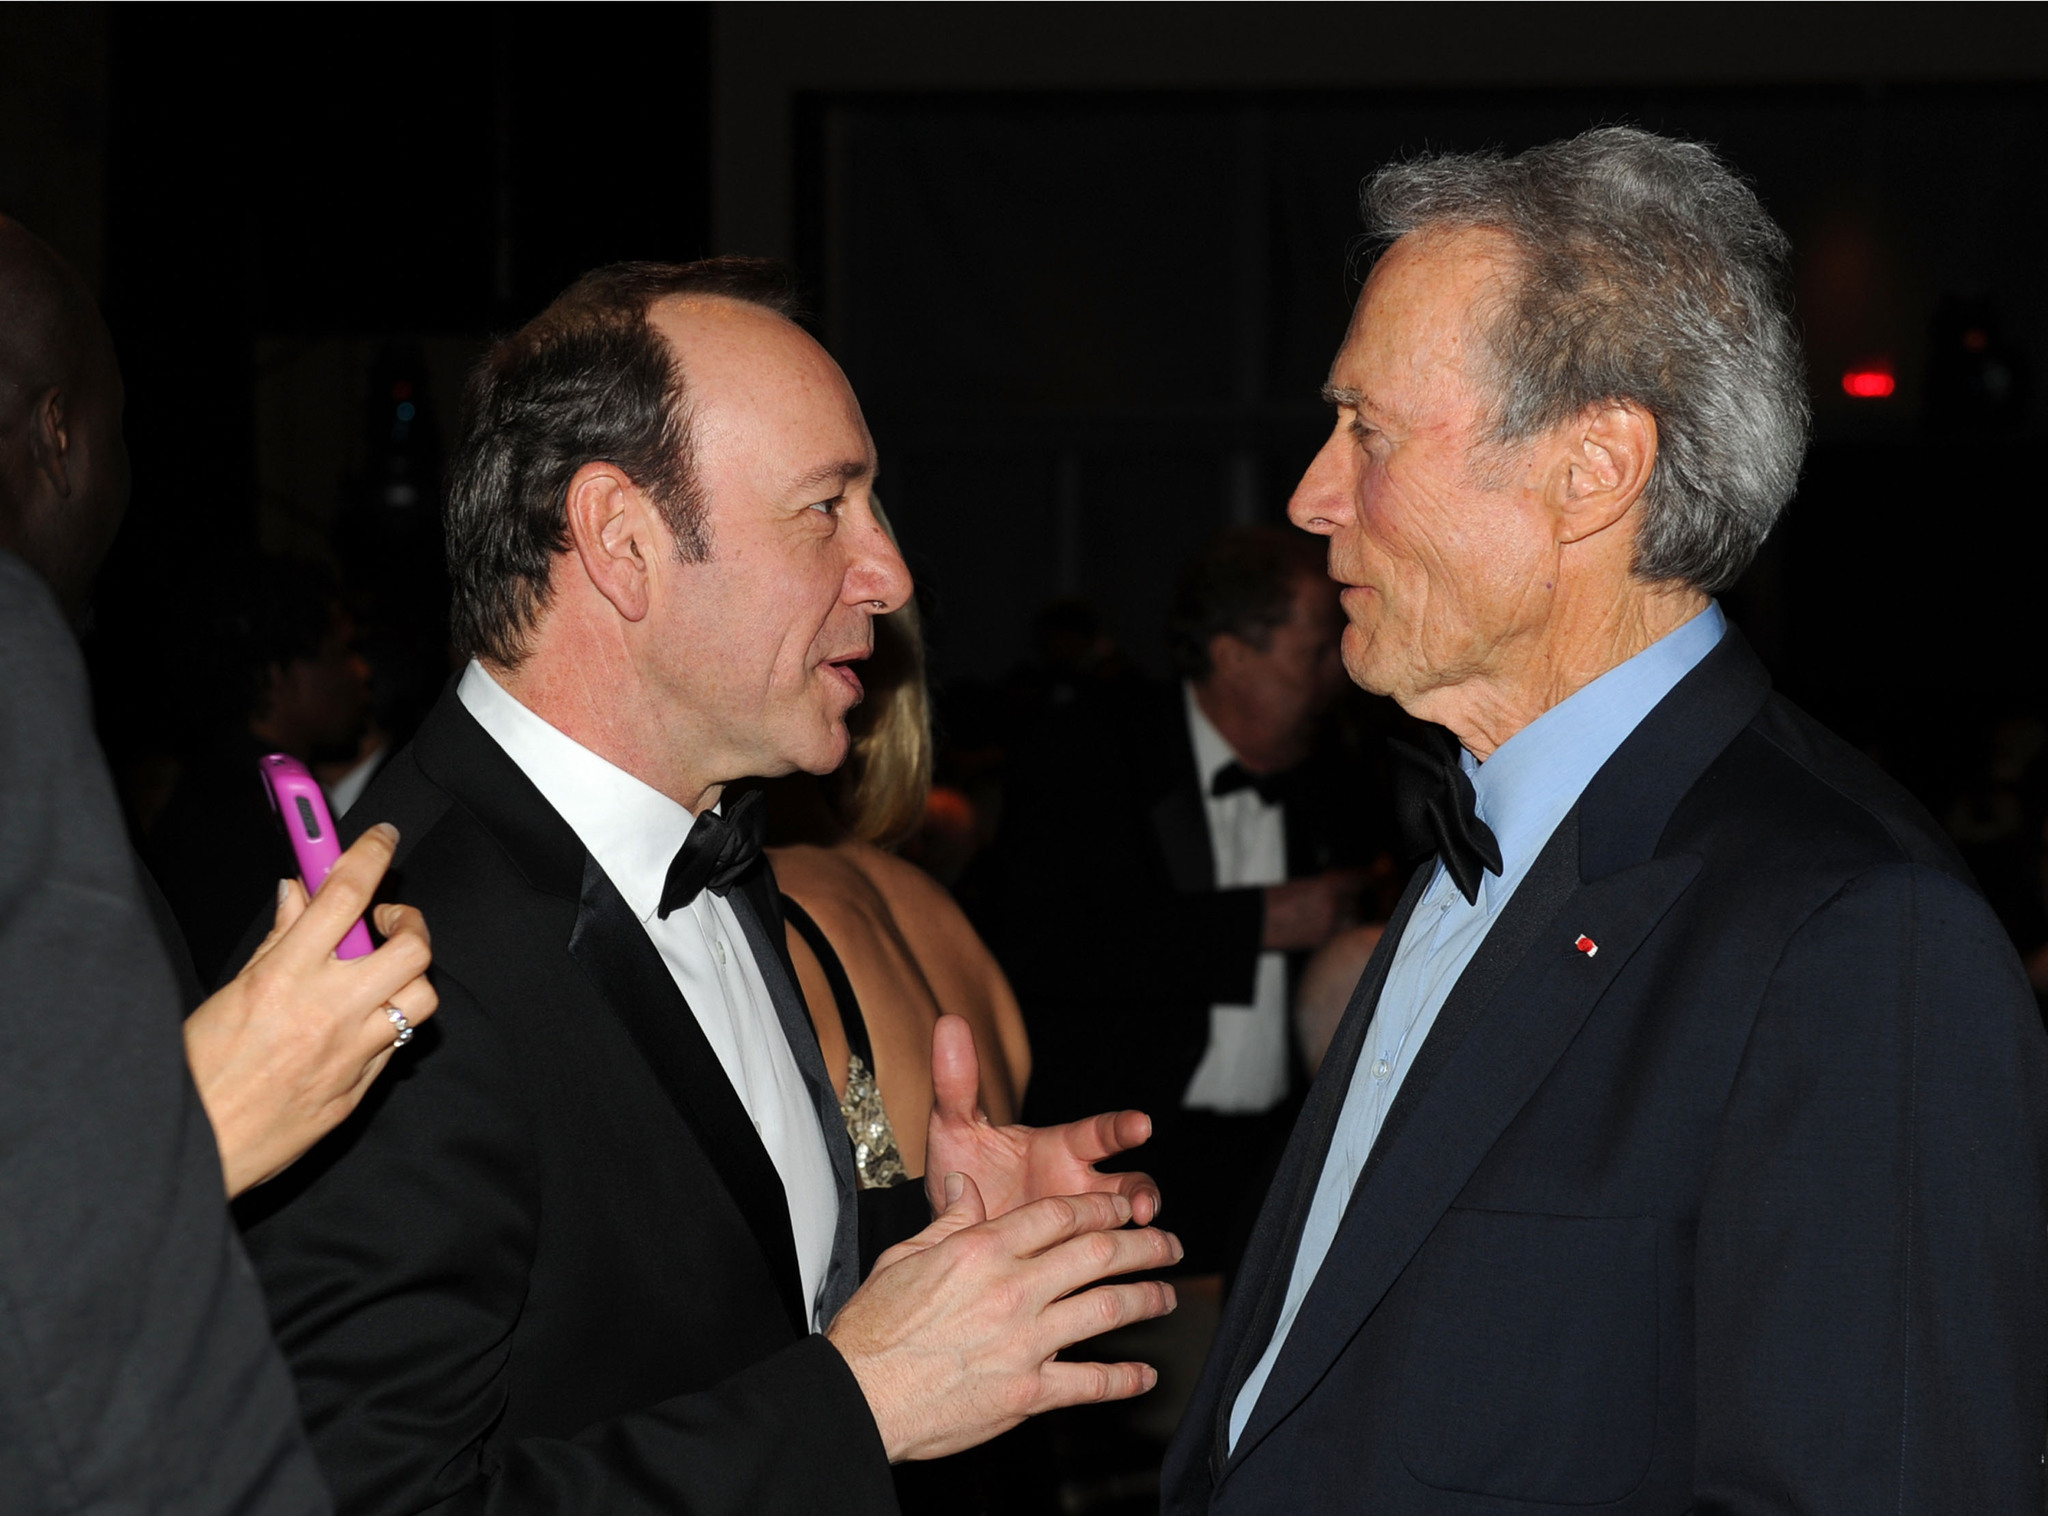 Clint Eastwood and Kevin Spacey